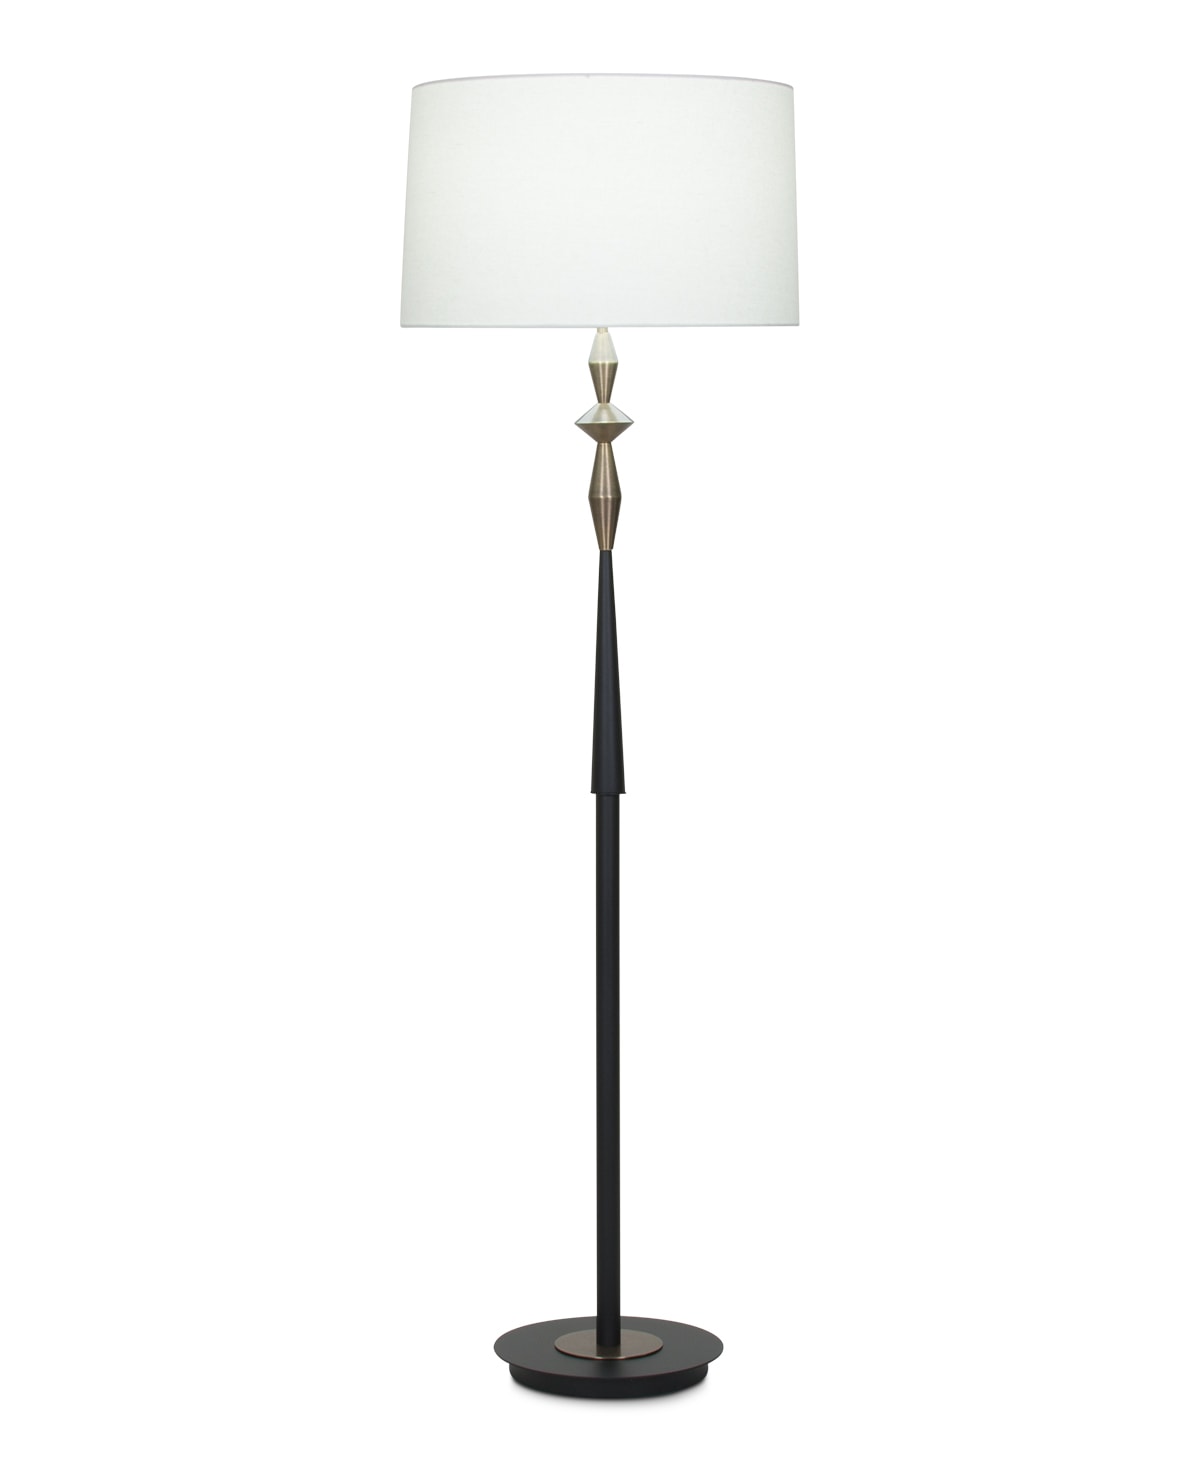 FlowDecor Morrison Floor Lamp in metal with antique brass & black matte finishes and off-white linen tapered drum shade (# 4052)